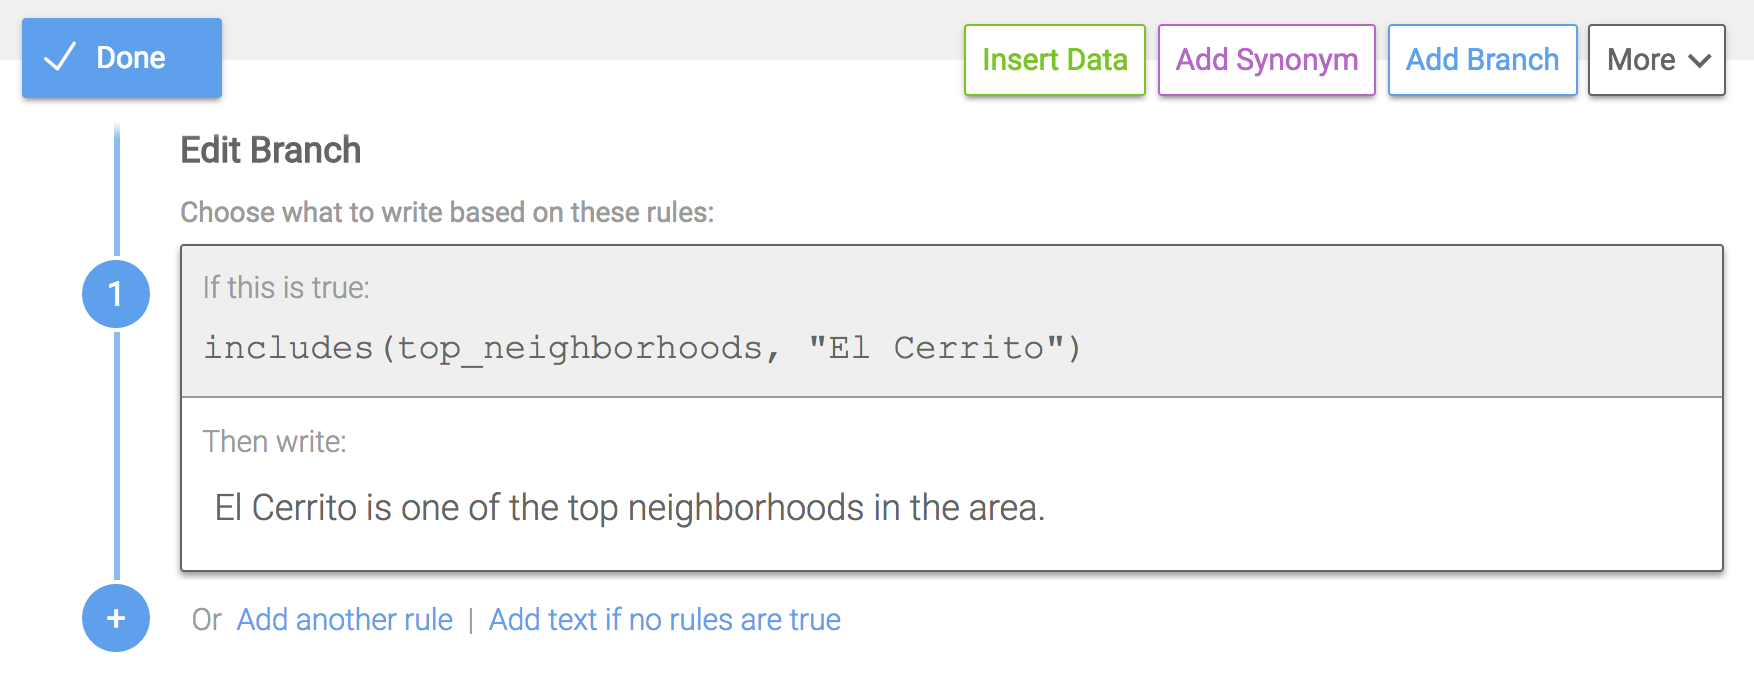 This rule will return True for data that has "El Cerrito" as a top neighborhood.